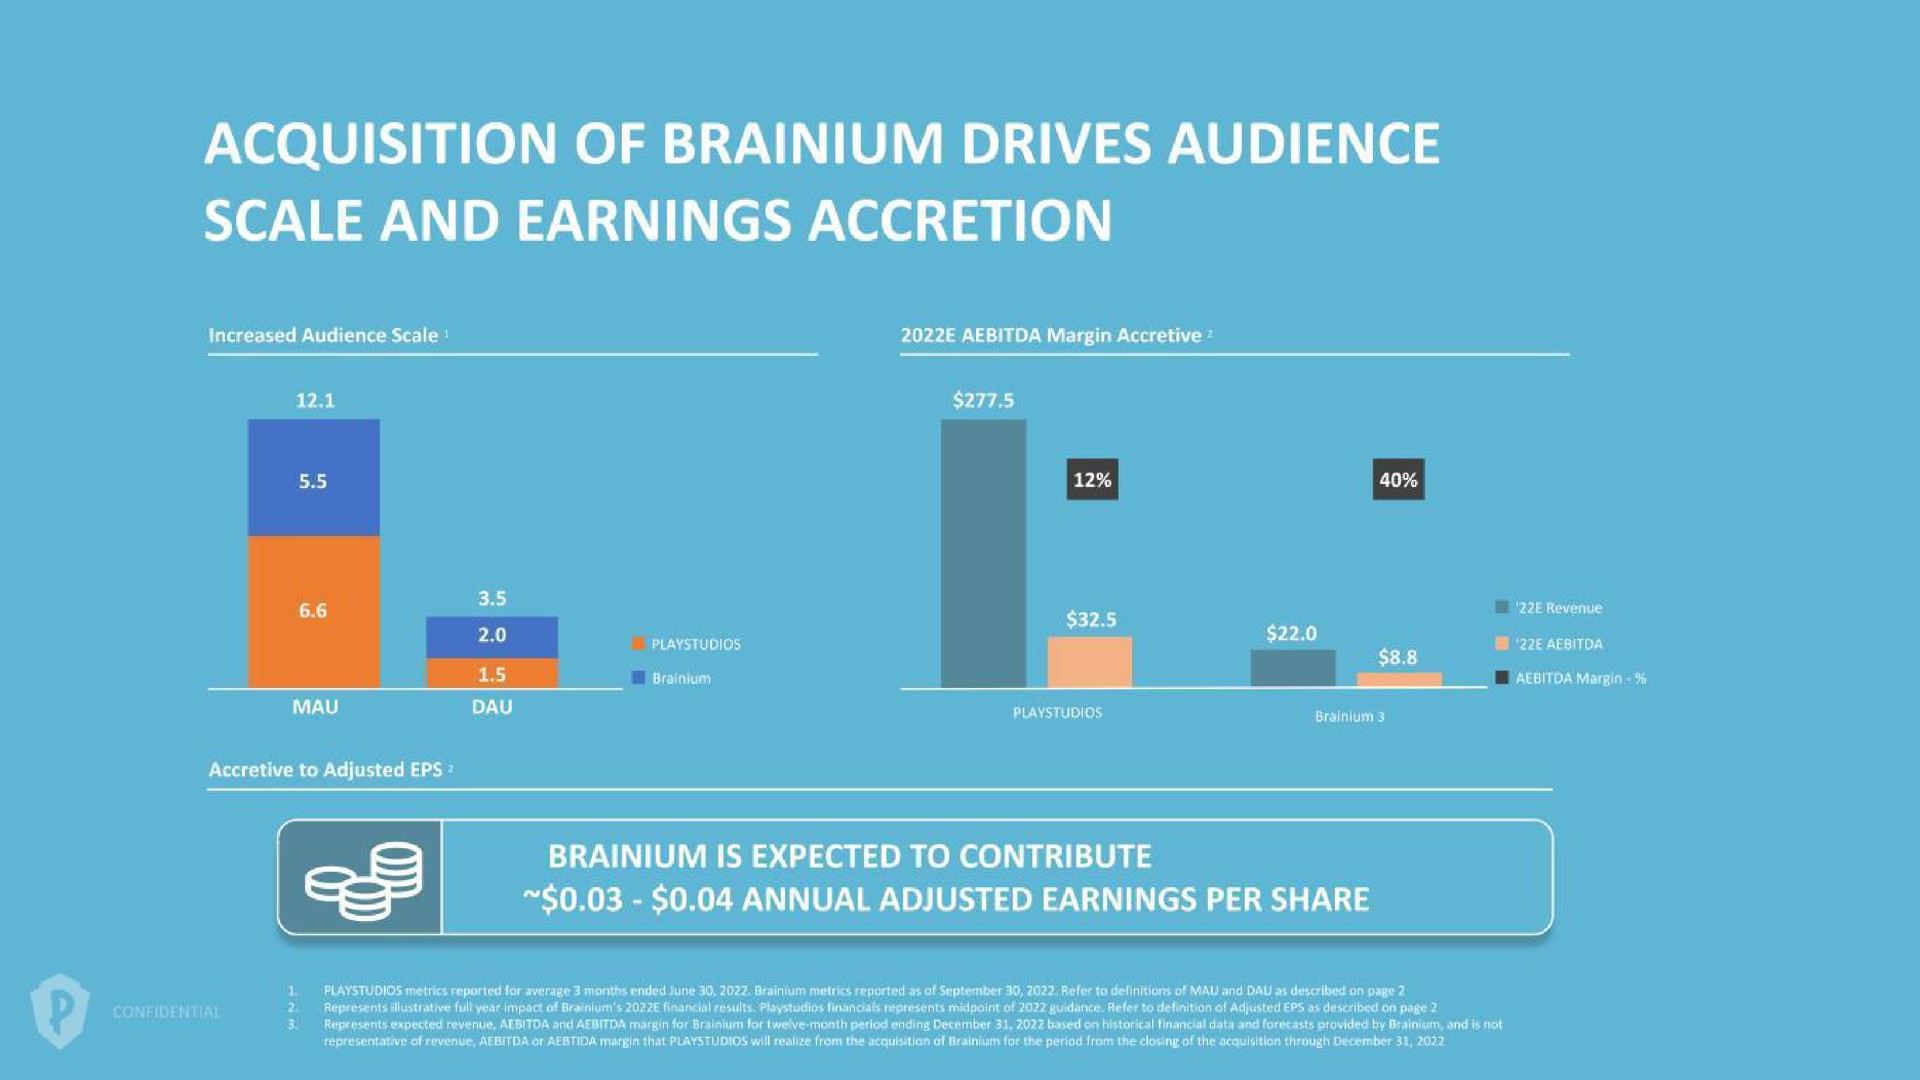 acquisition of drives audience scale and earnings accretion | Playstudios